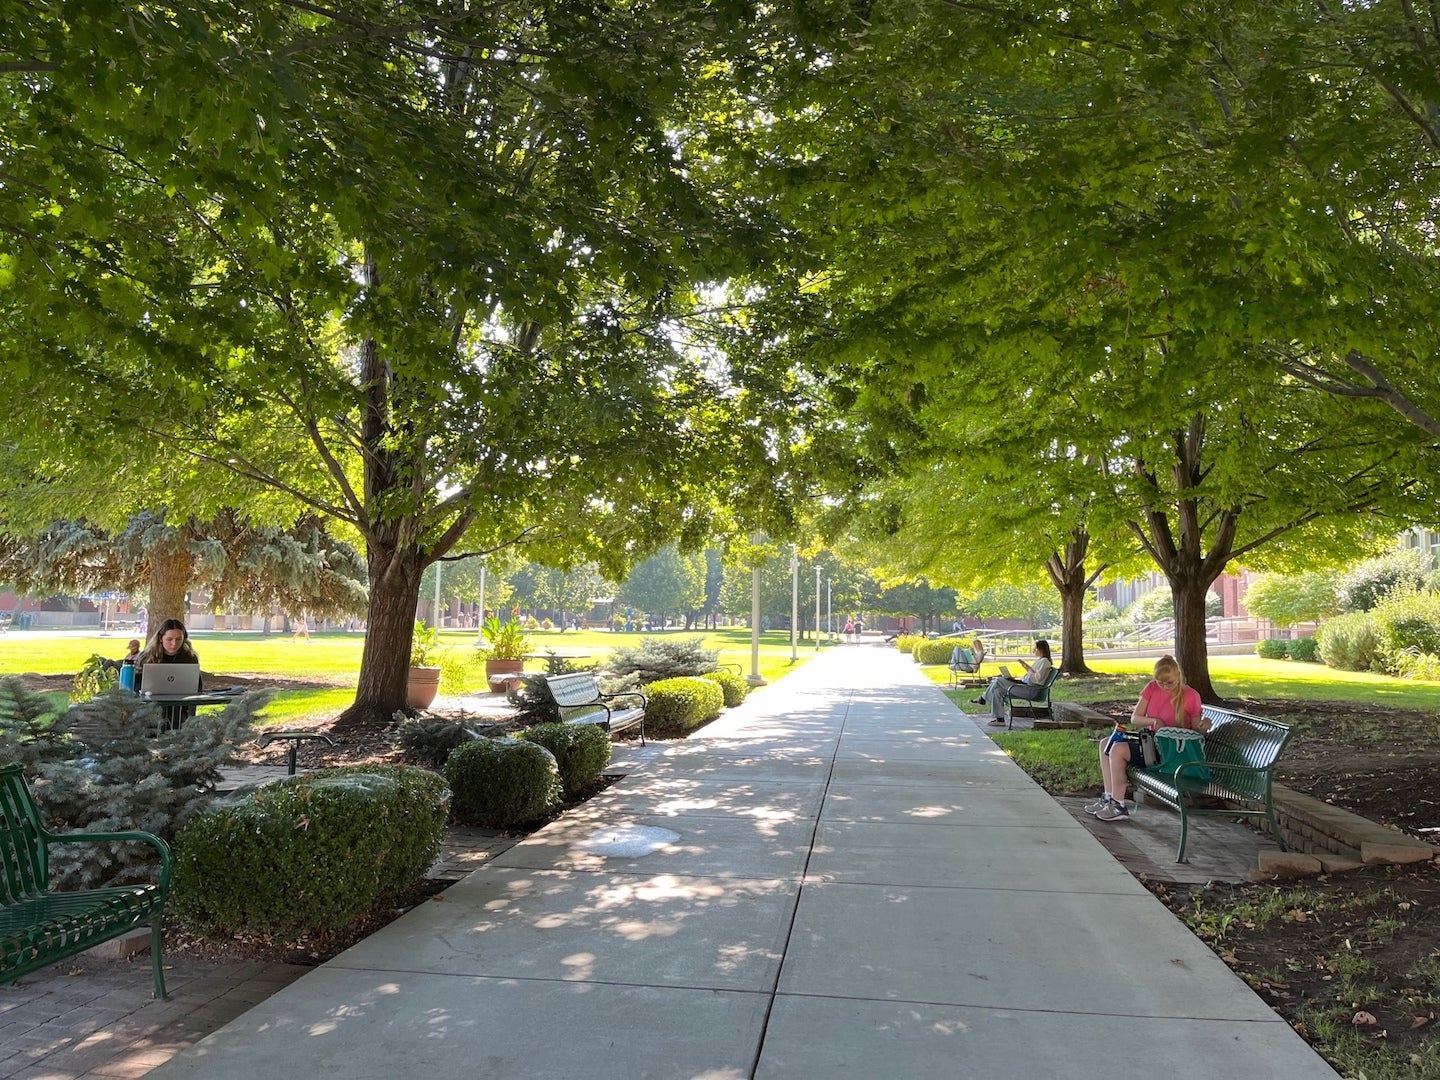 A path through the Boise State Quad with trees on either side.